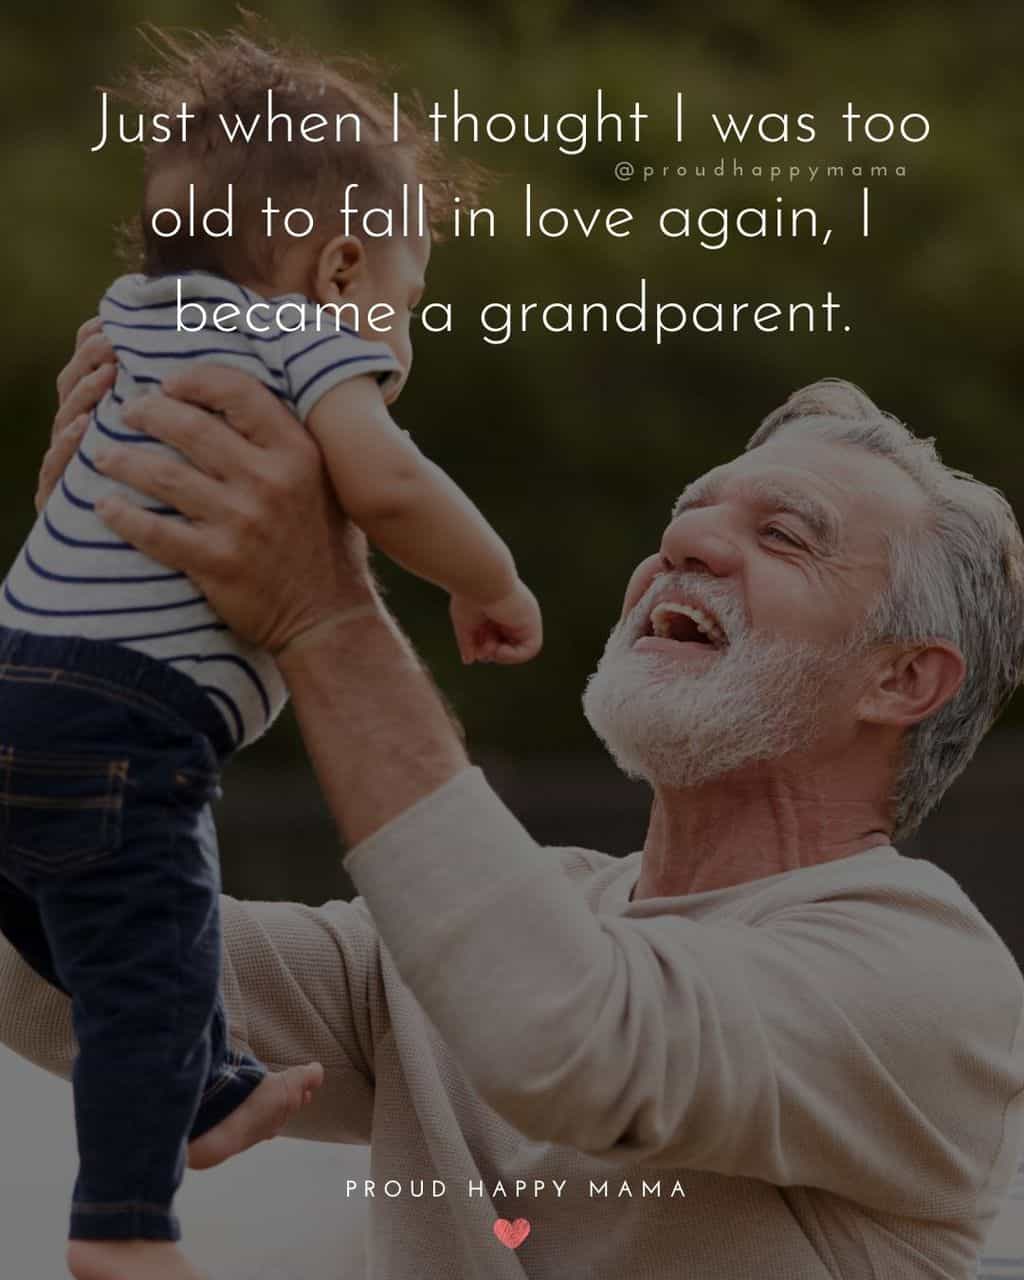 Grandparent Quotes – Just when I thought I was too old to fall in love again I became a grandparent.’